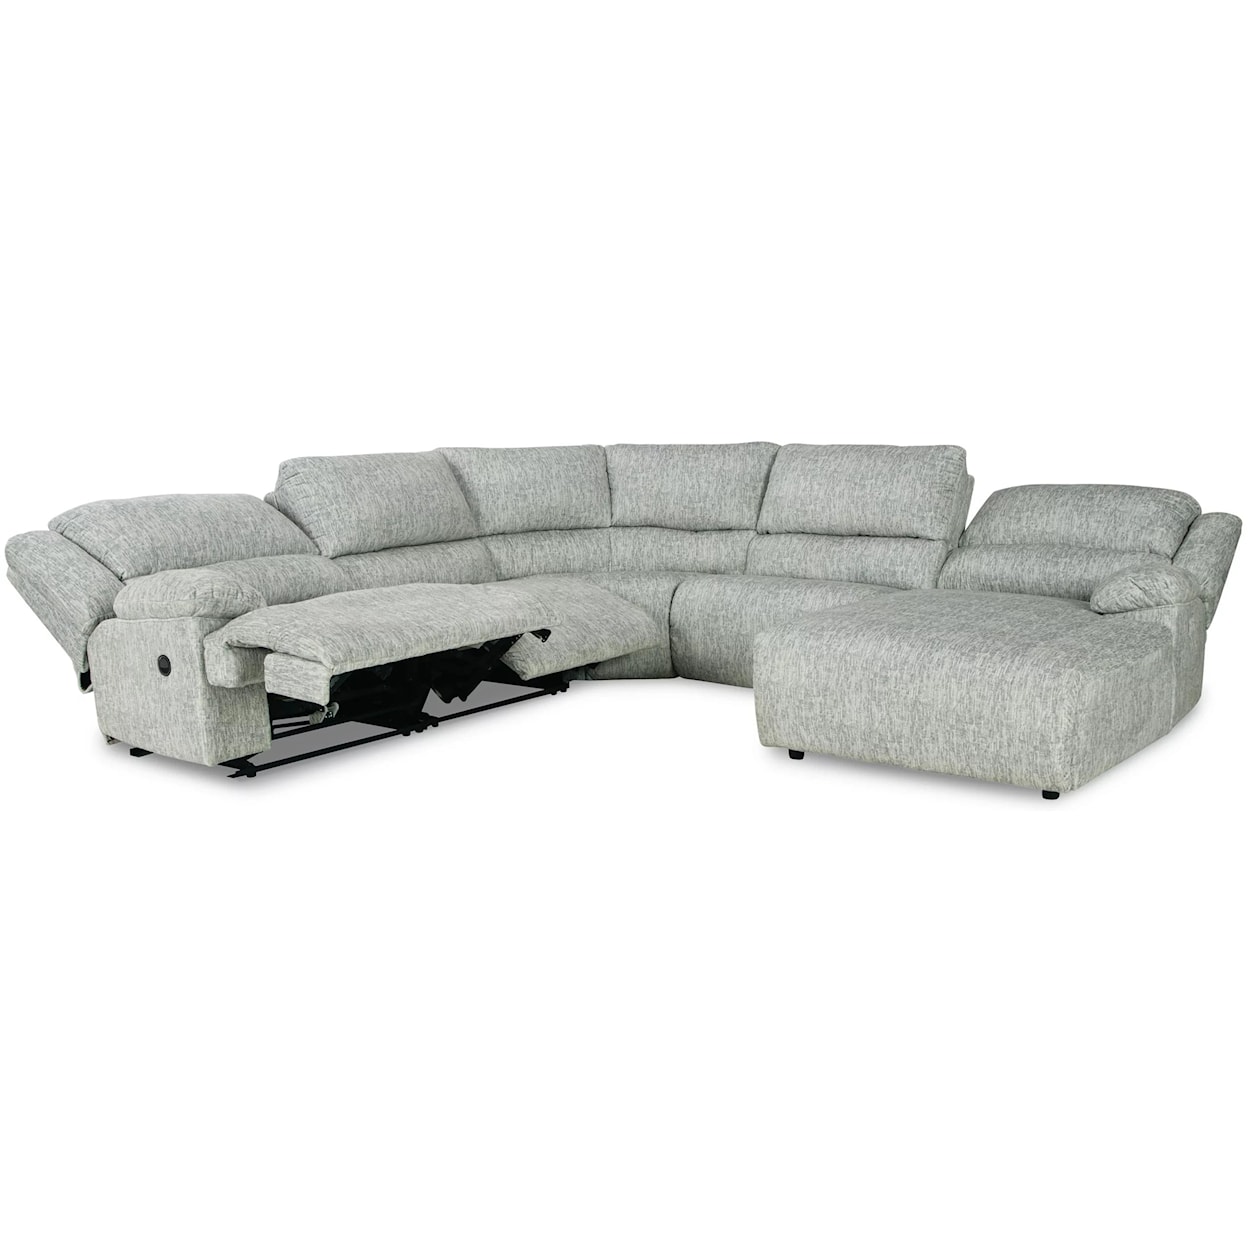 Signature Design by Ashley Furniture McClelland 5-Piece Reclining Sectional with Chaise